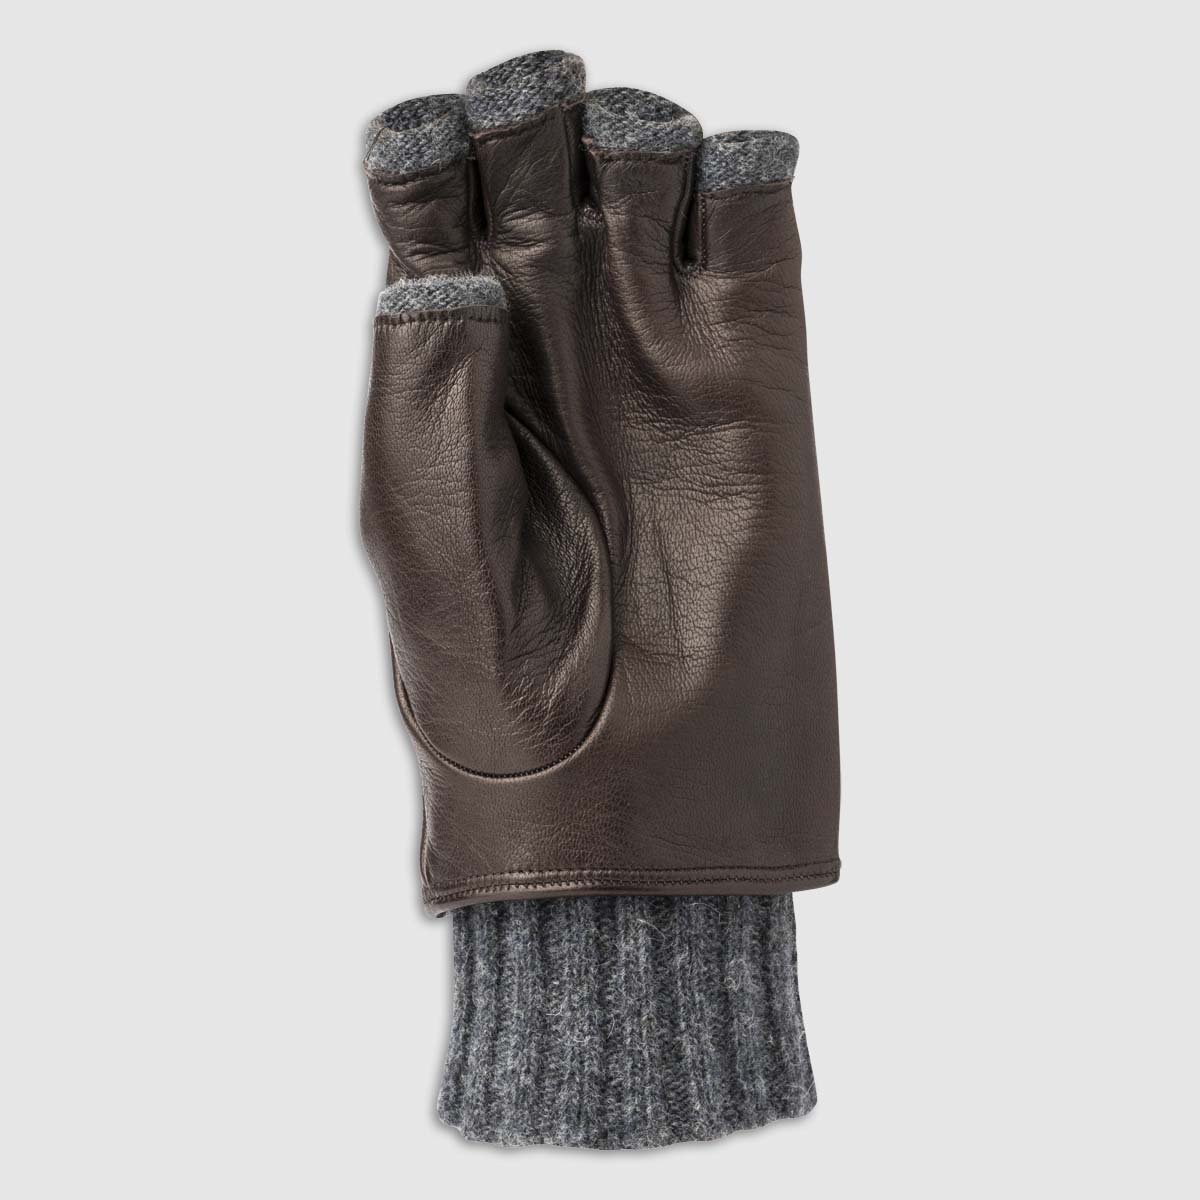 Half-Finger Nappa Leather Glove with Wool Lining in Mocca Alpo Guanti on sale 2022 2